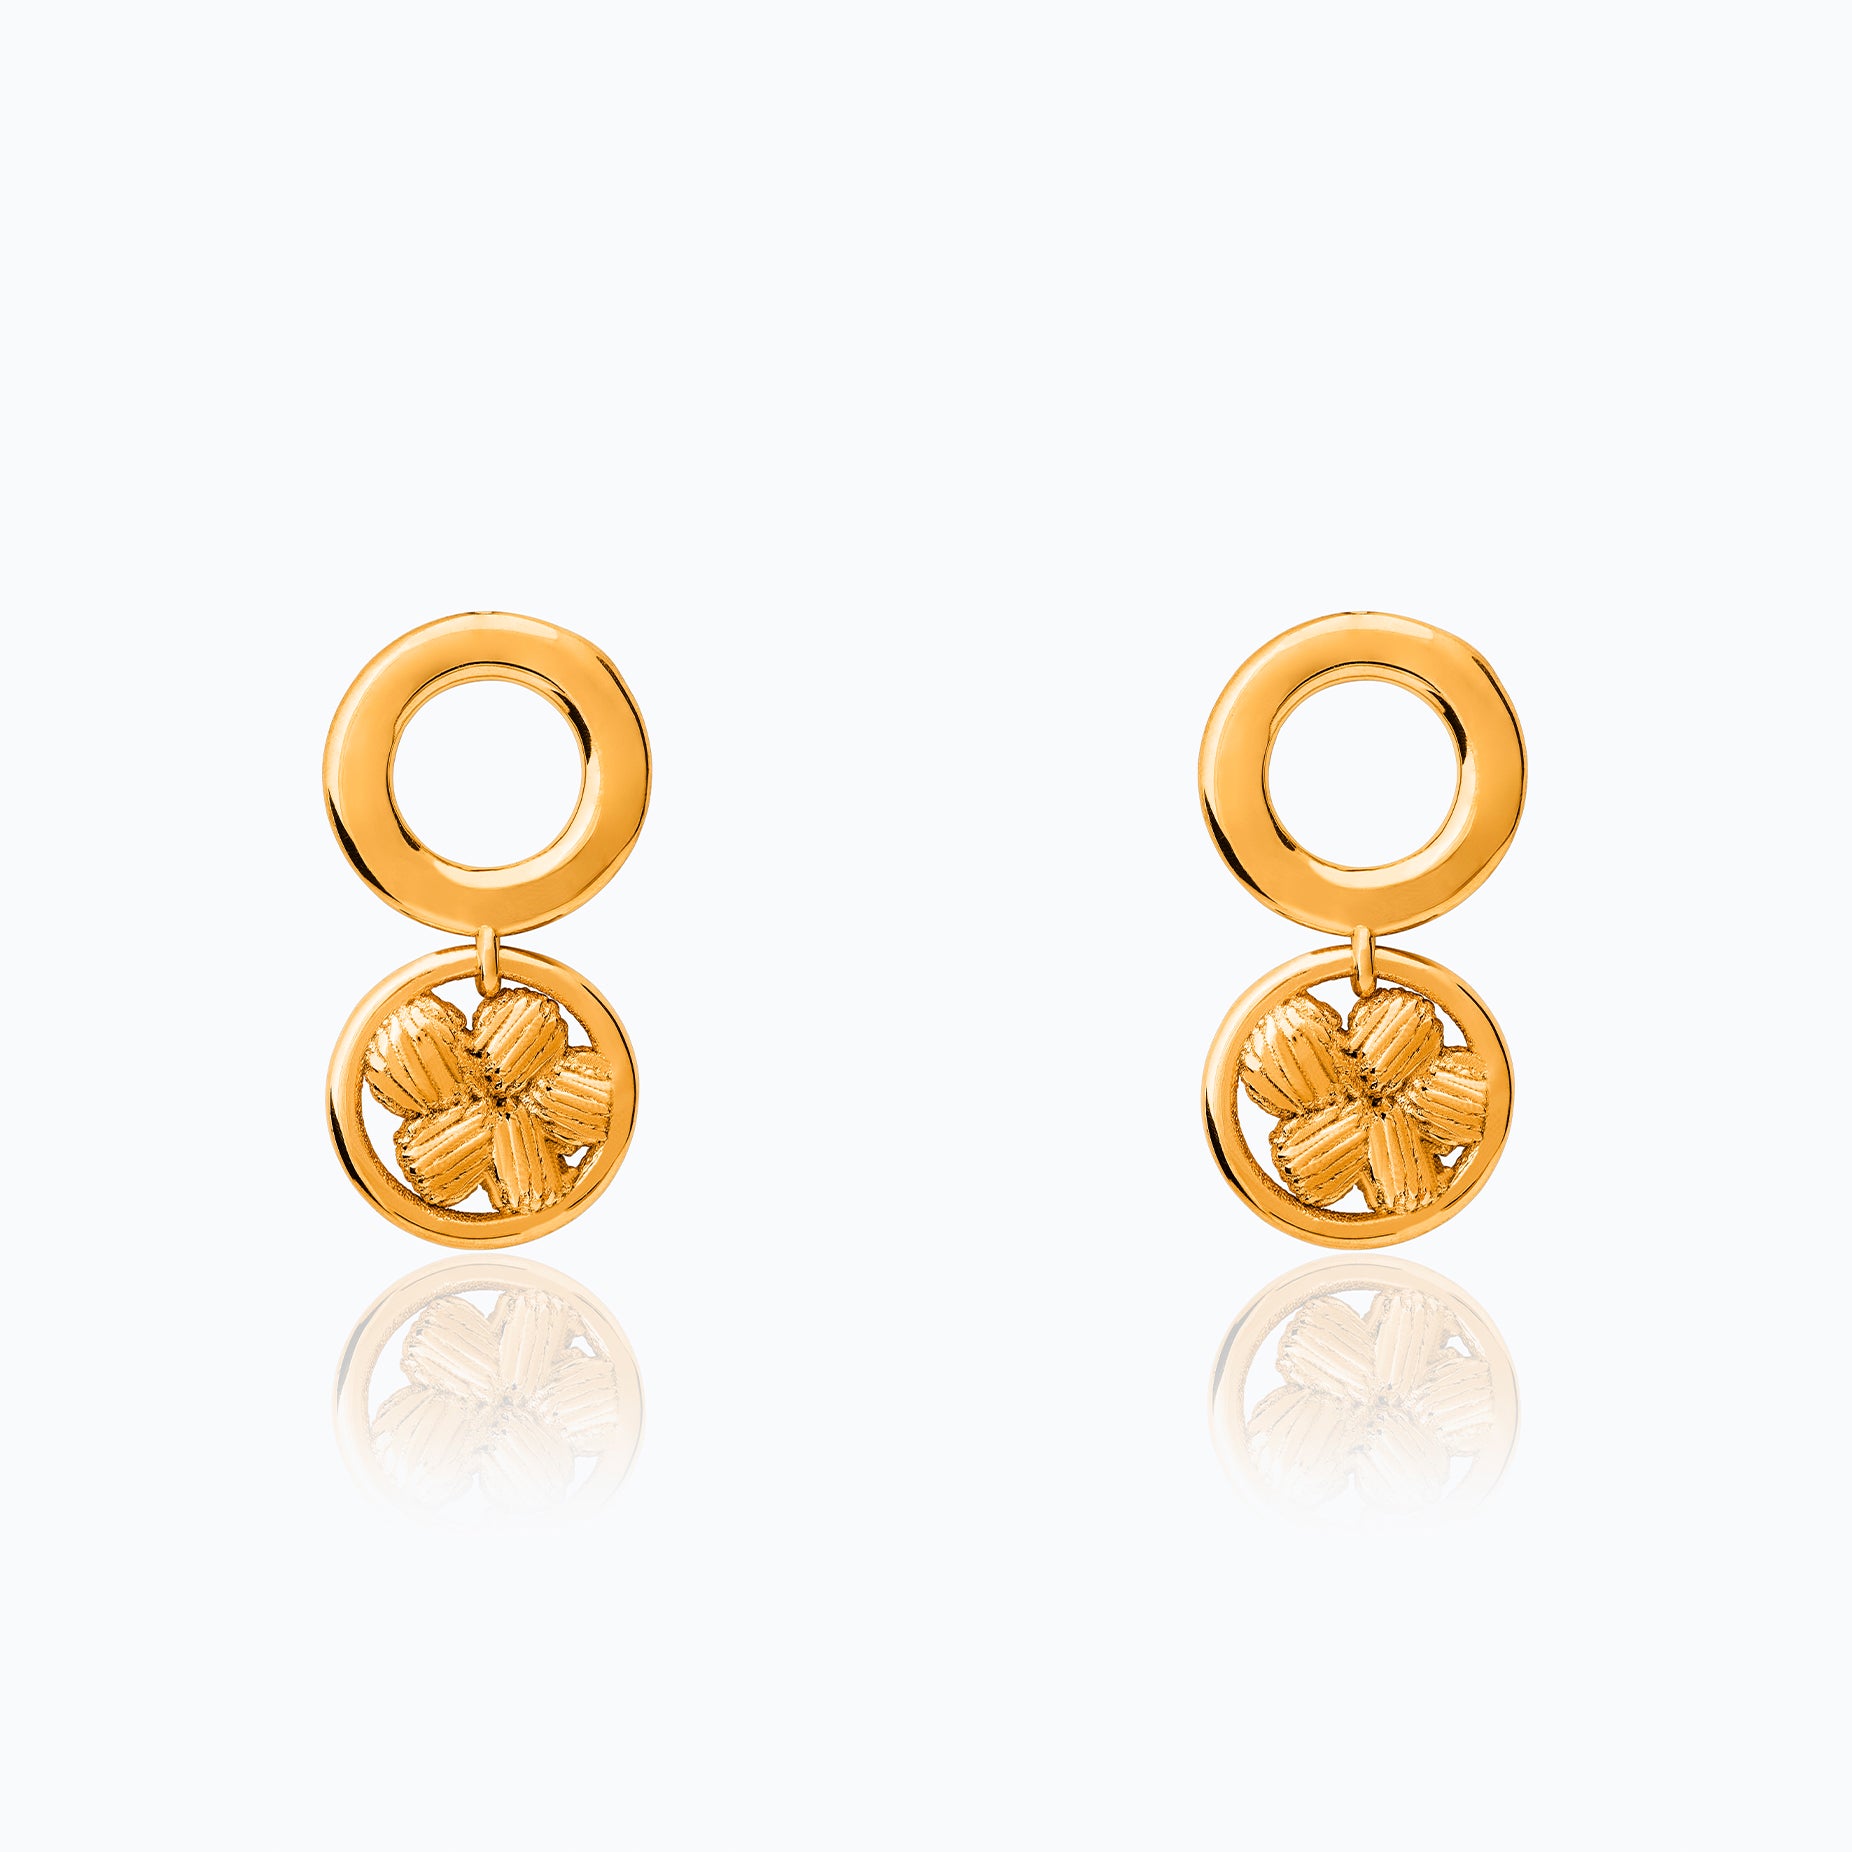 Gold And 4.59ct Radiant Cut Fancy Intense Yellow Diamond Stud Earrings  Available For Immediate Sale At Sotheby's